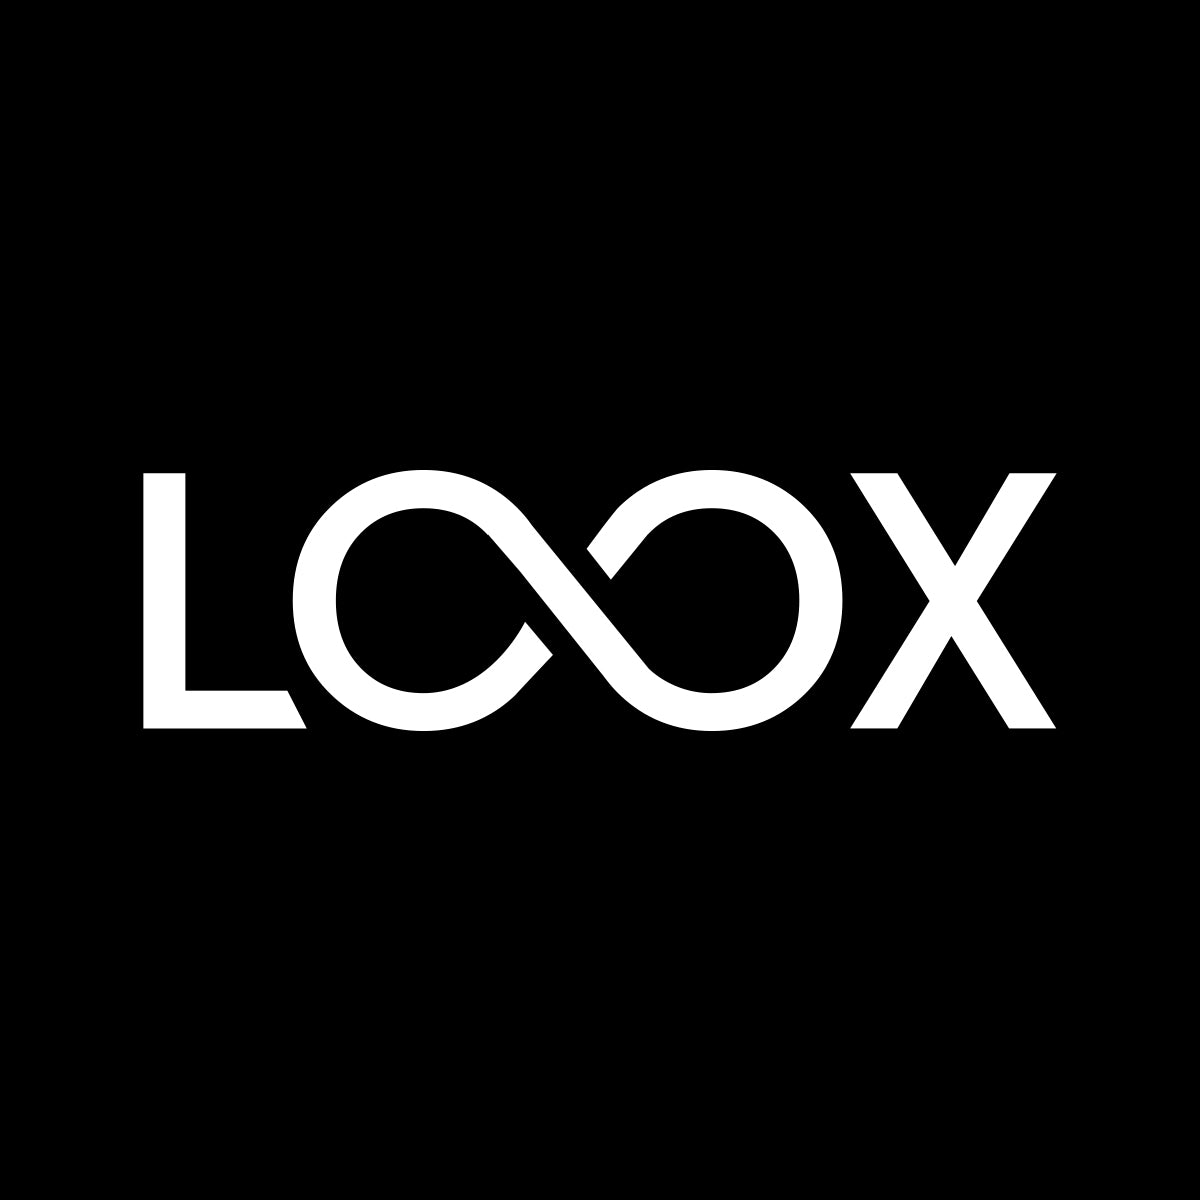 Loox Product Reviews Referrals